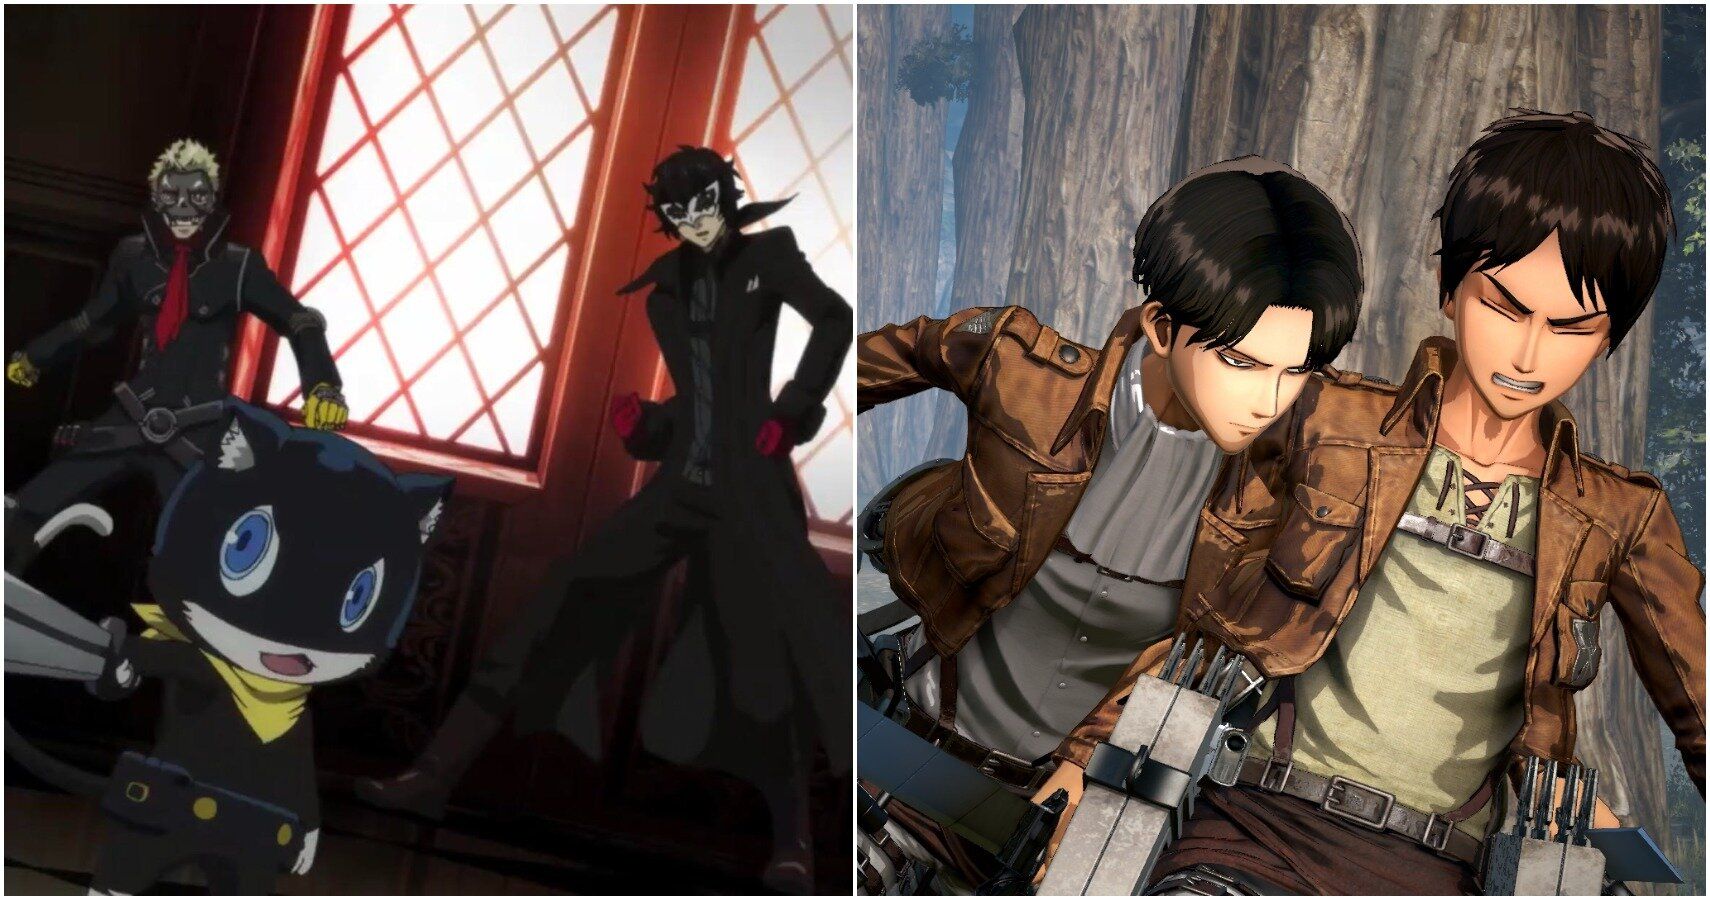 split image of persona 5 and attack on titan game